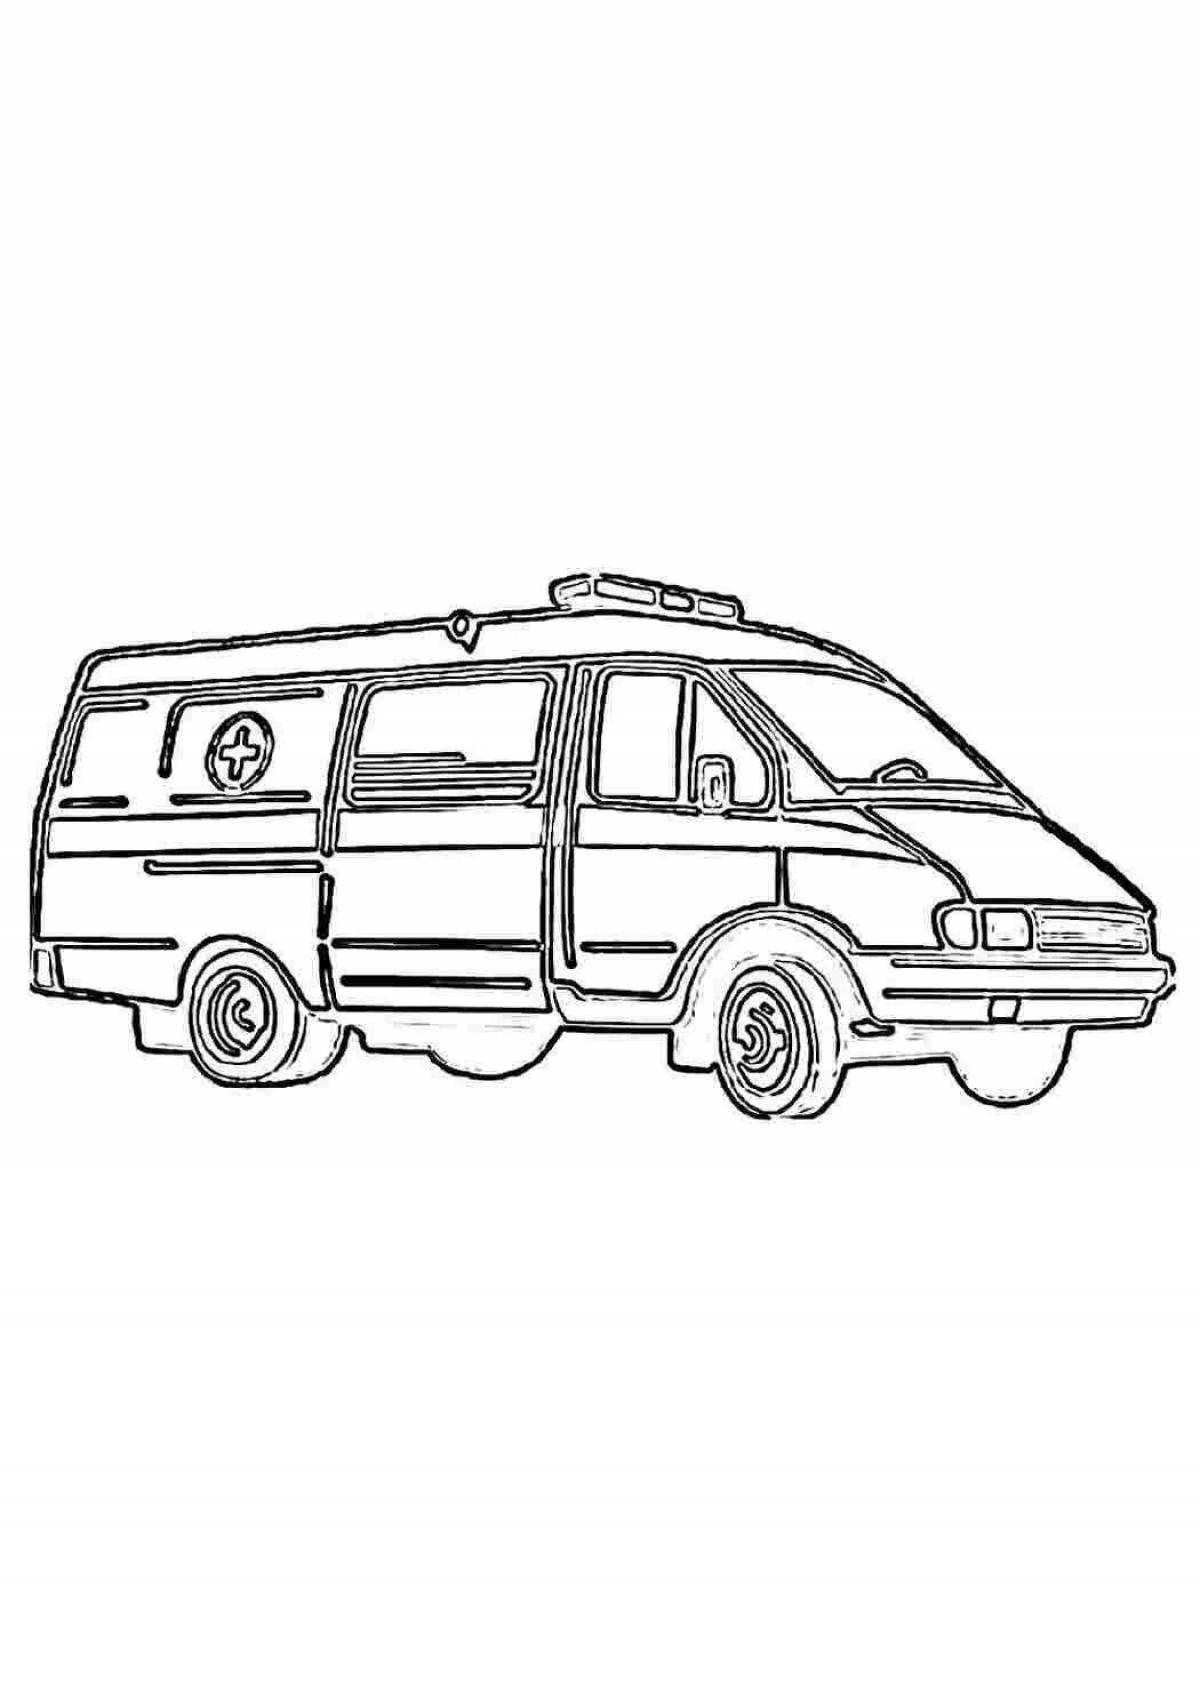 Fantastic ambulance coloring page for boys